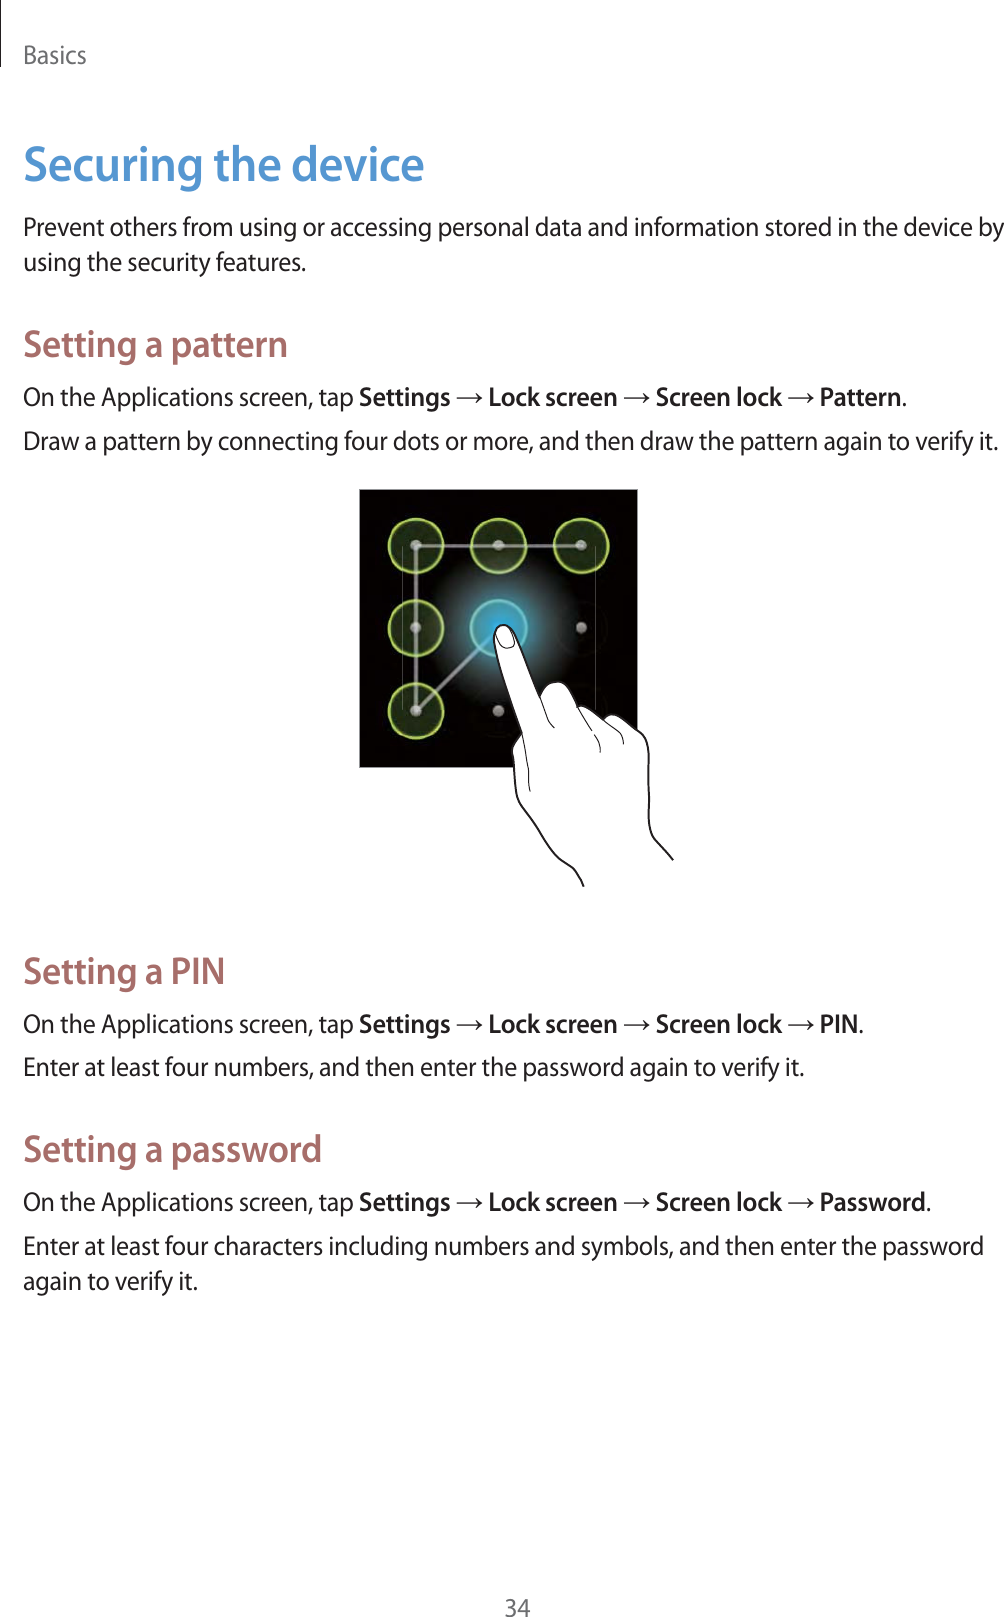 Basics34Securing the devicePrevent others from using or accessing personal data and information stored in the device by using the security features.Setting a patternOn the Applications screen, tap Settings ĺ Lock screen ĺ Screen lock ĺ Pattern.Draw a pattern by connecting four dots or more, and then draw the pattern again to verify it.Setting a PINOn the Applications screen, tap Settings ĺ Lock screen ĺ Screen lock ĺ PIN.Enter at least four numbers, and then enter the password again to verify it.Setting a passwordOn the Applications screen, tap Settings ĺ Lock screen ĺ Screen lock ĺ Password.Enter at least four characters including numbers and symbols, and then enter the password again to verify it.